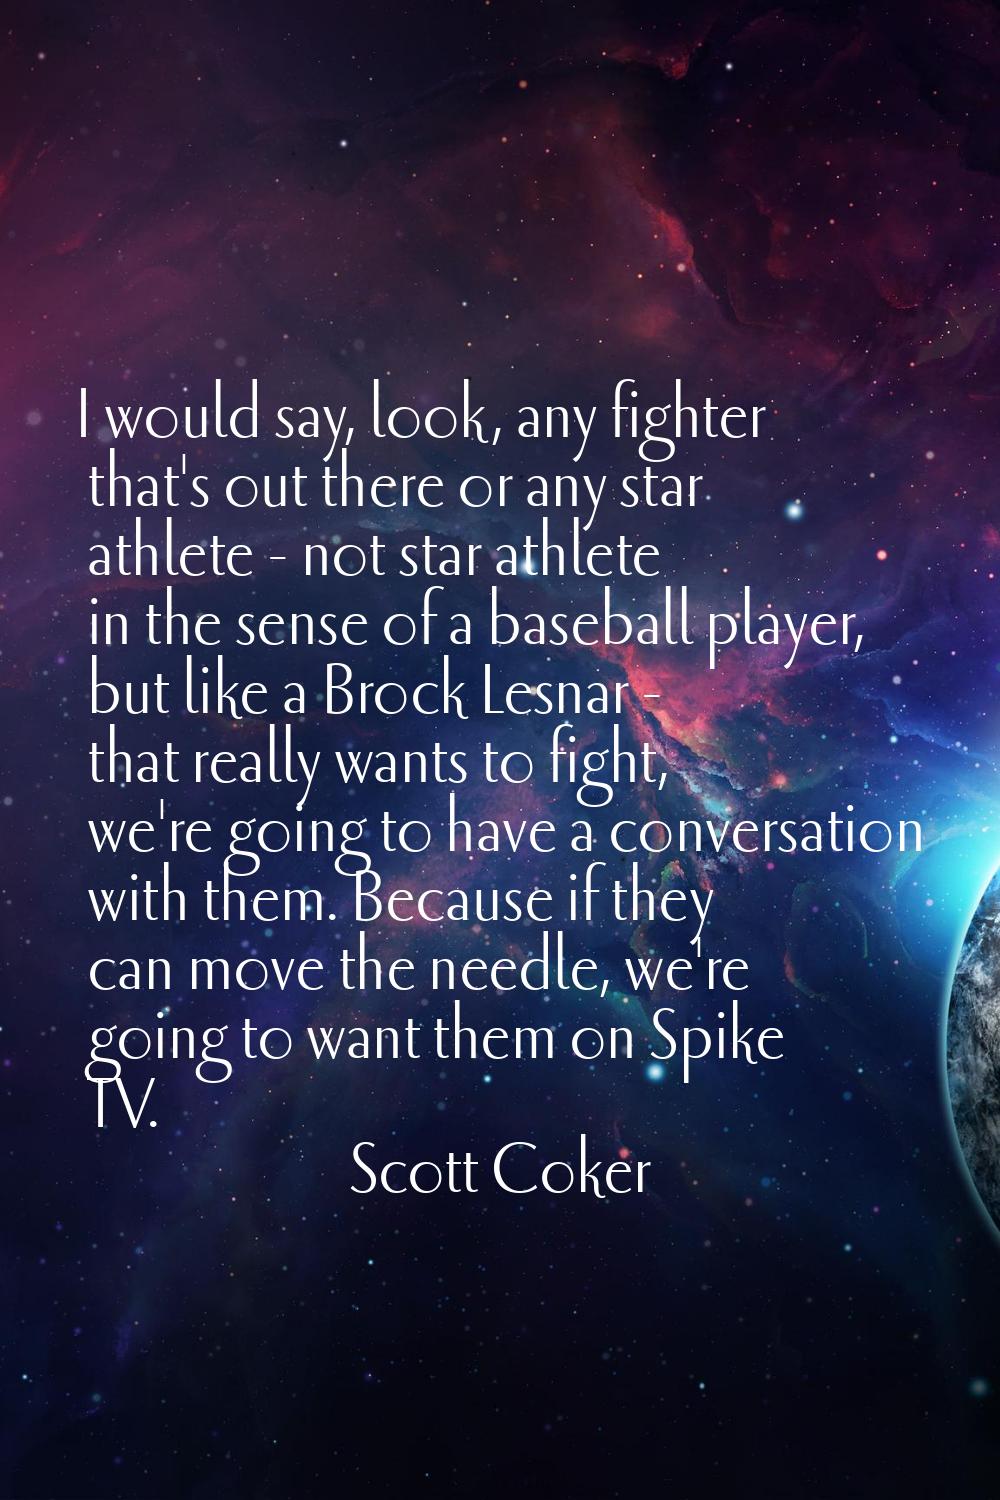 I would say, look, any fighter that's out there or any star athlete - not star athlete in the sense